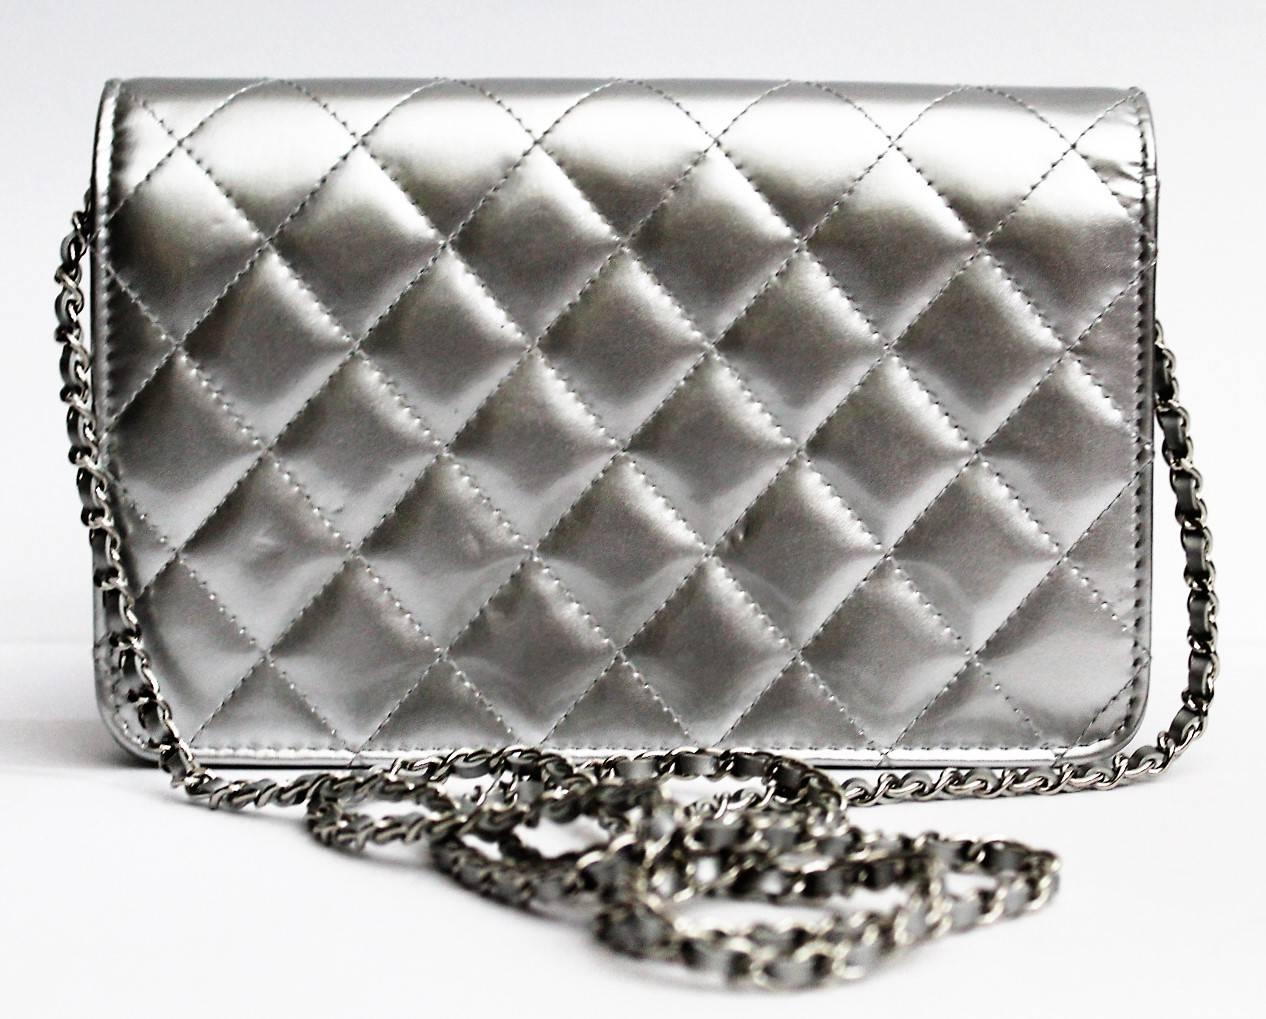 Beautiful Chanel with silver leather and hardware. It is a clutch and at same time a shoulder bag. Inside has two pockets, one with eight compartments for the credit card and one with a zip closure . The conditions are like new. We have dustbag,